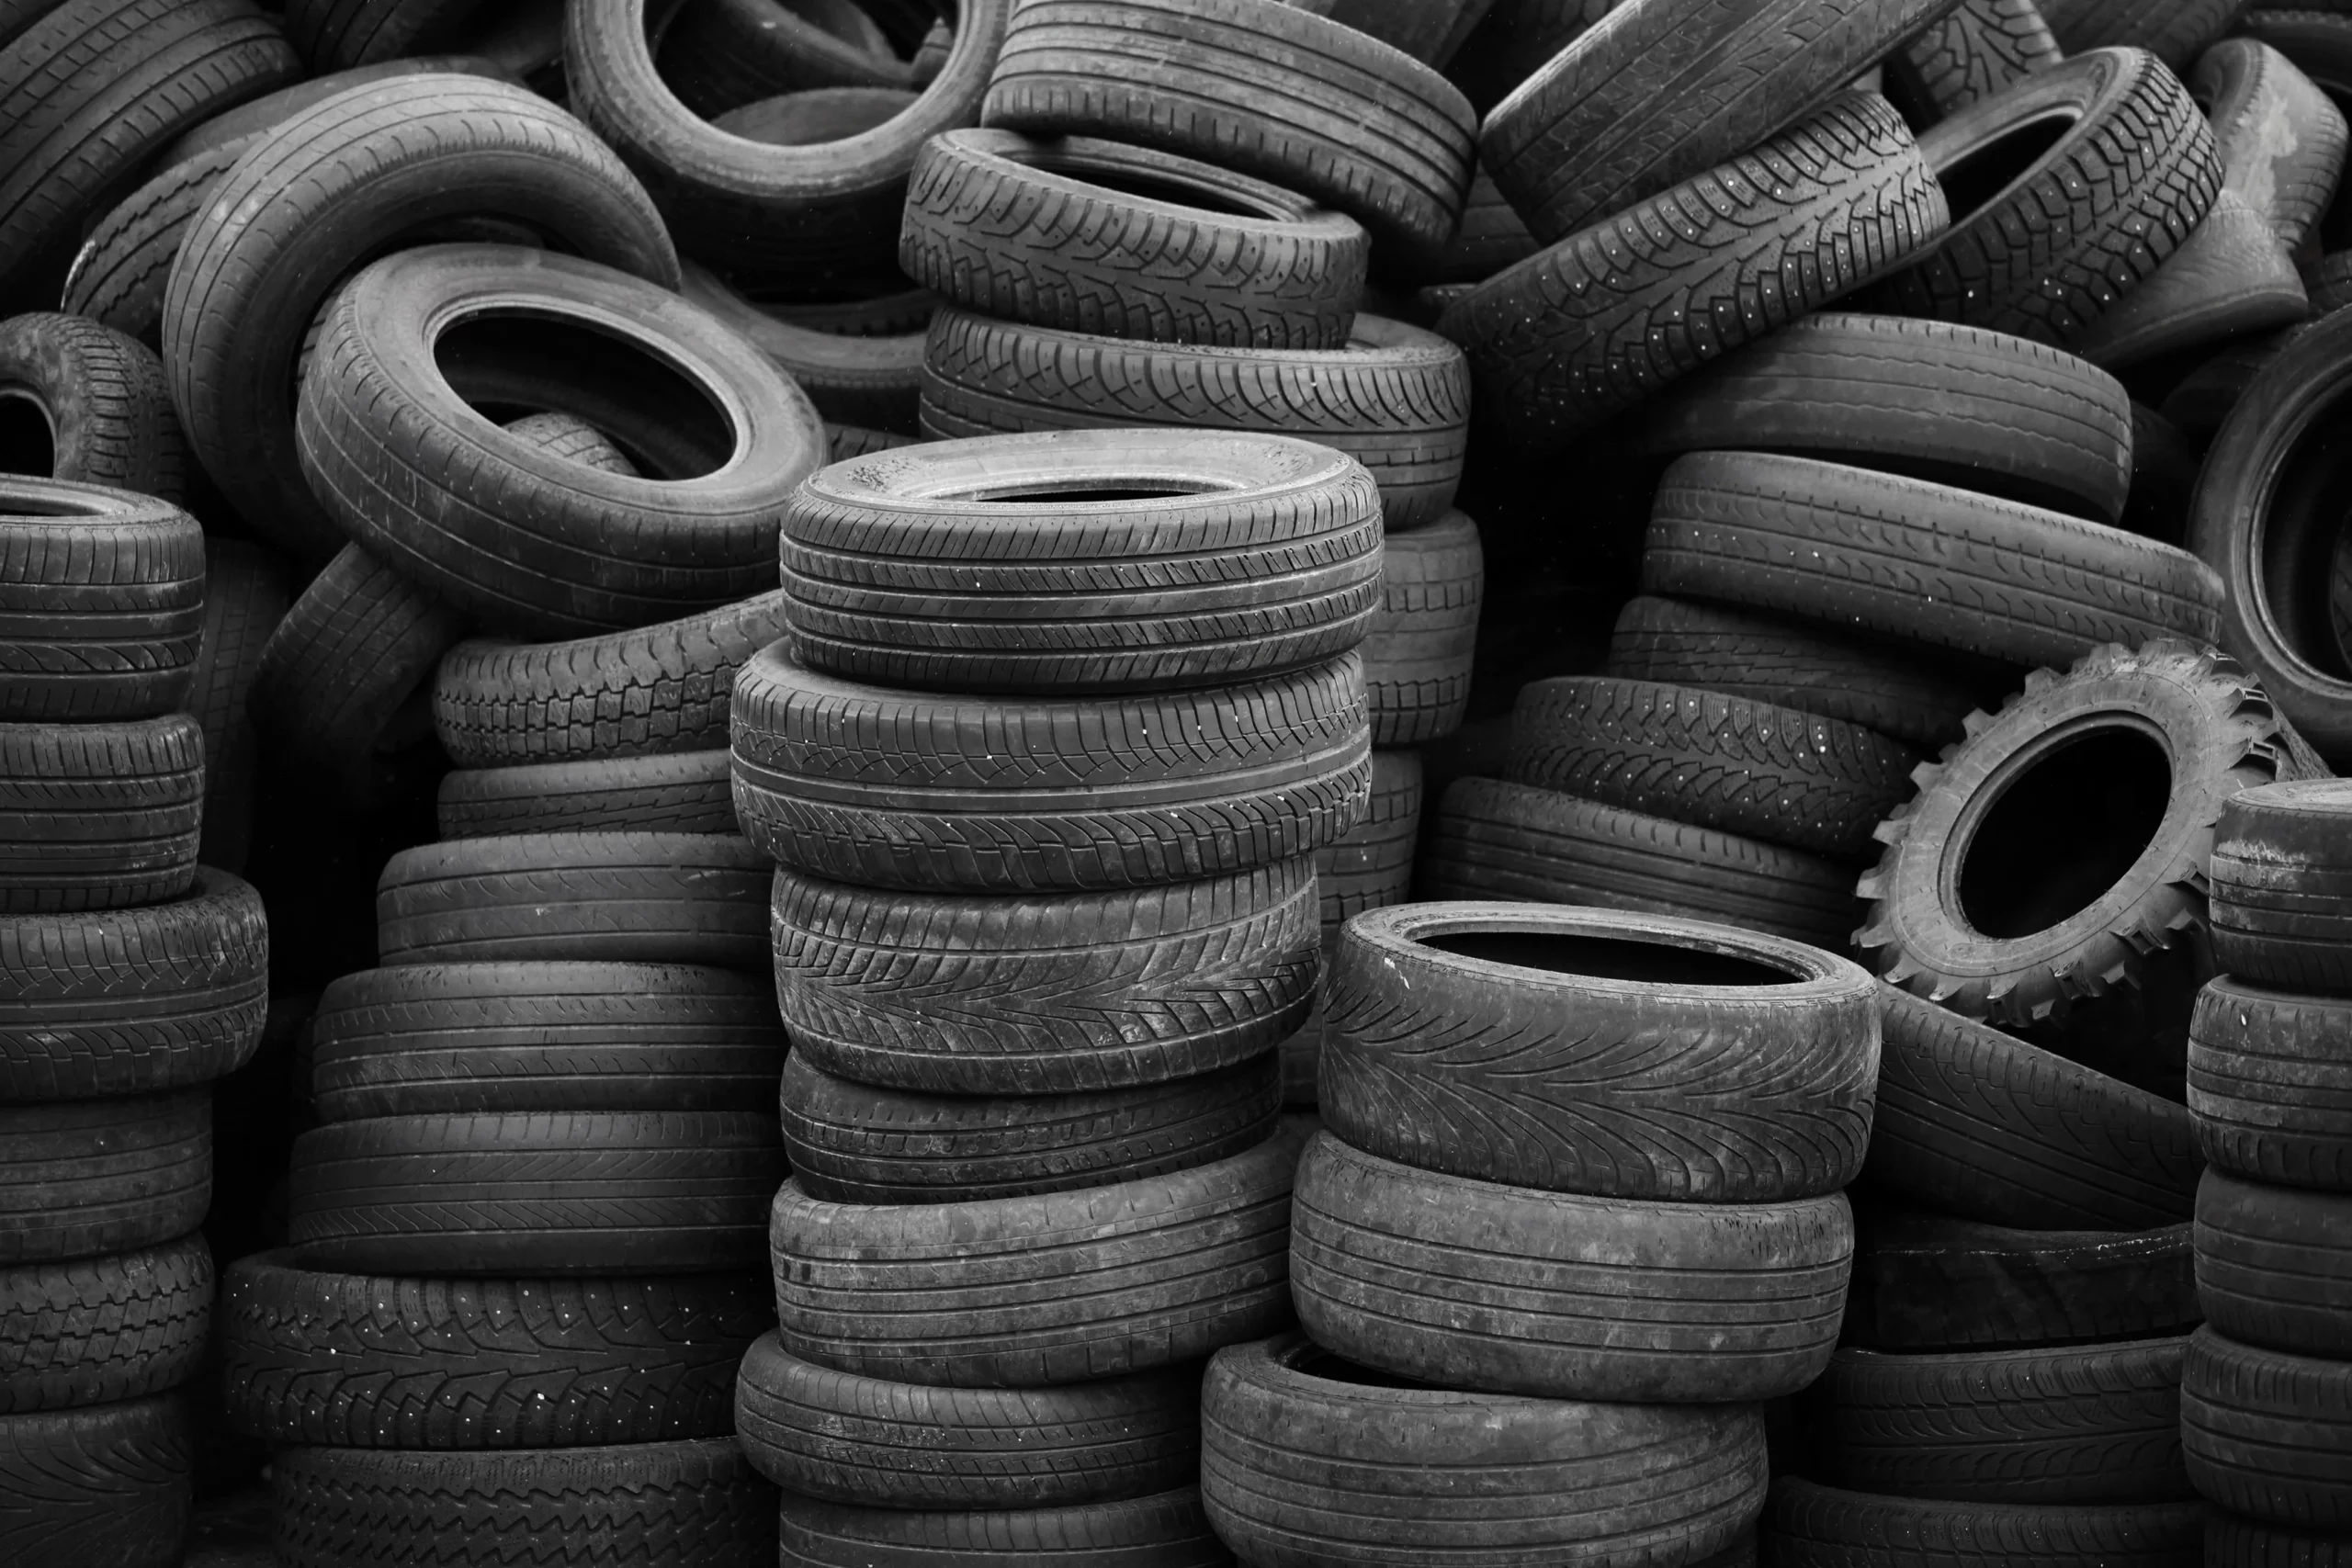 What Do Tire Shops Do With Old Tires: Recycling and Disposal Explained